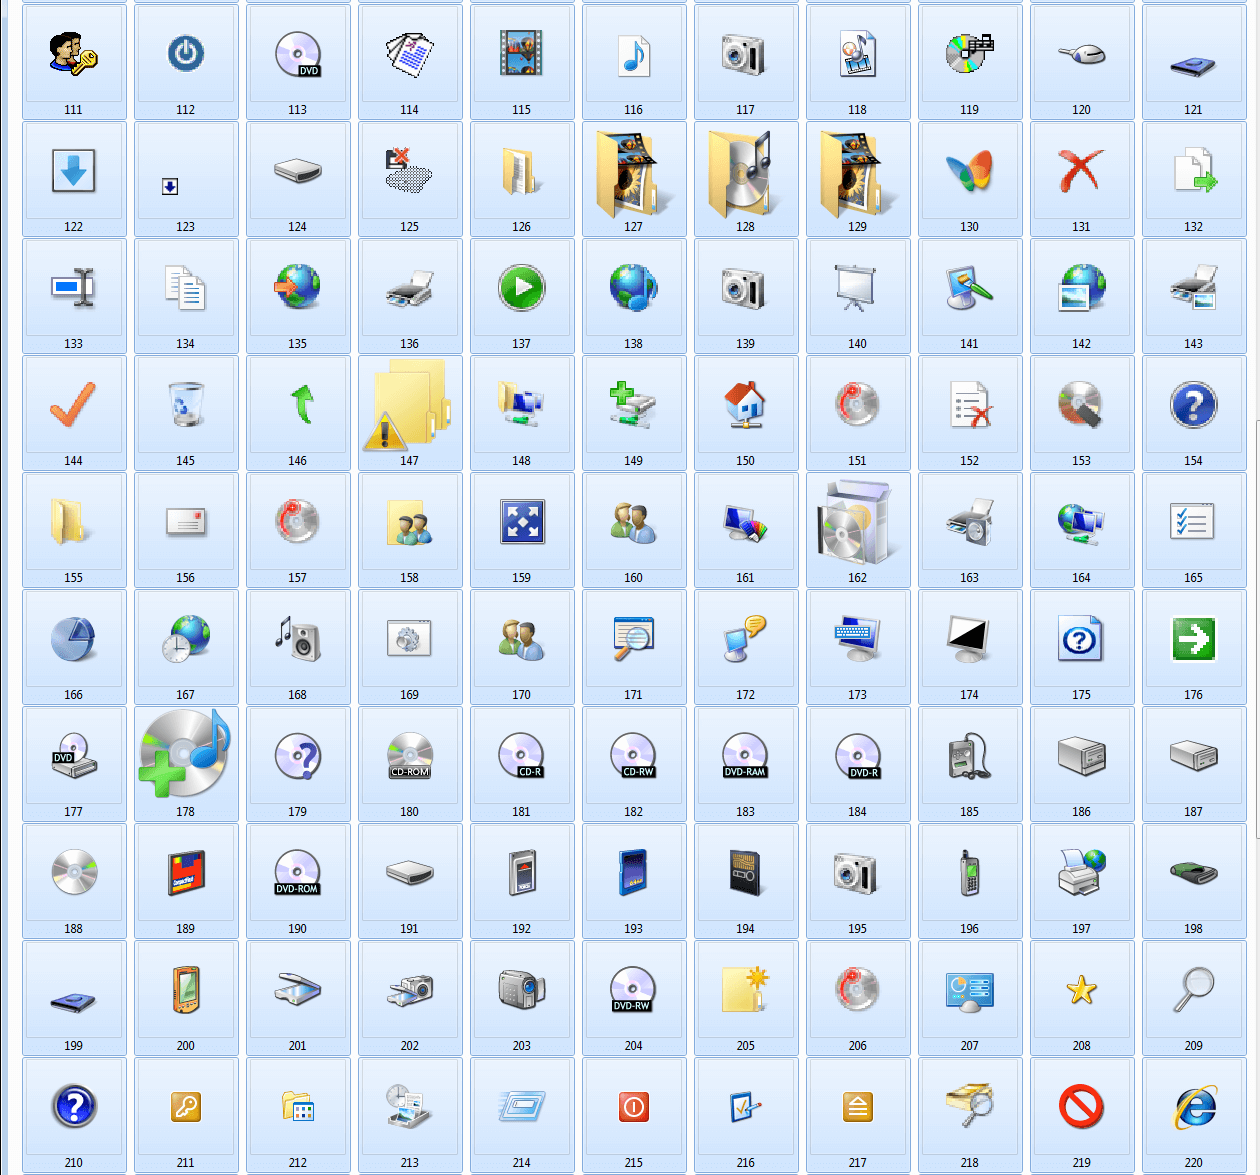 Windows 7 icons of shell32.dll (2/3)